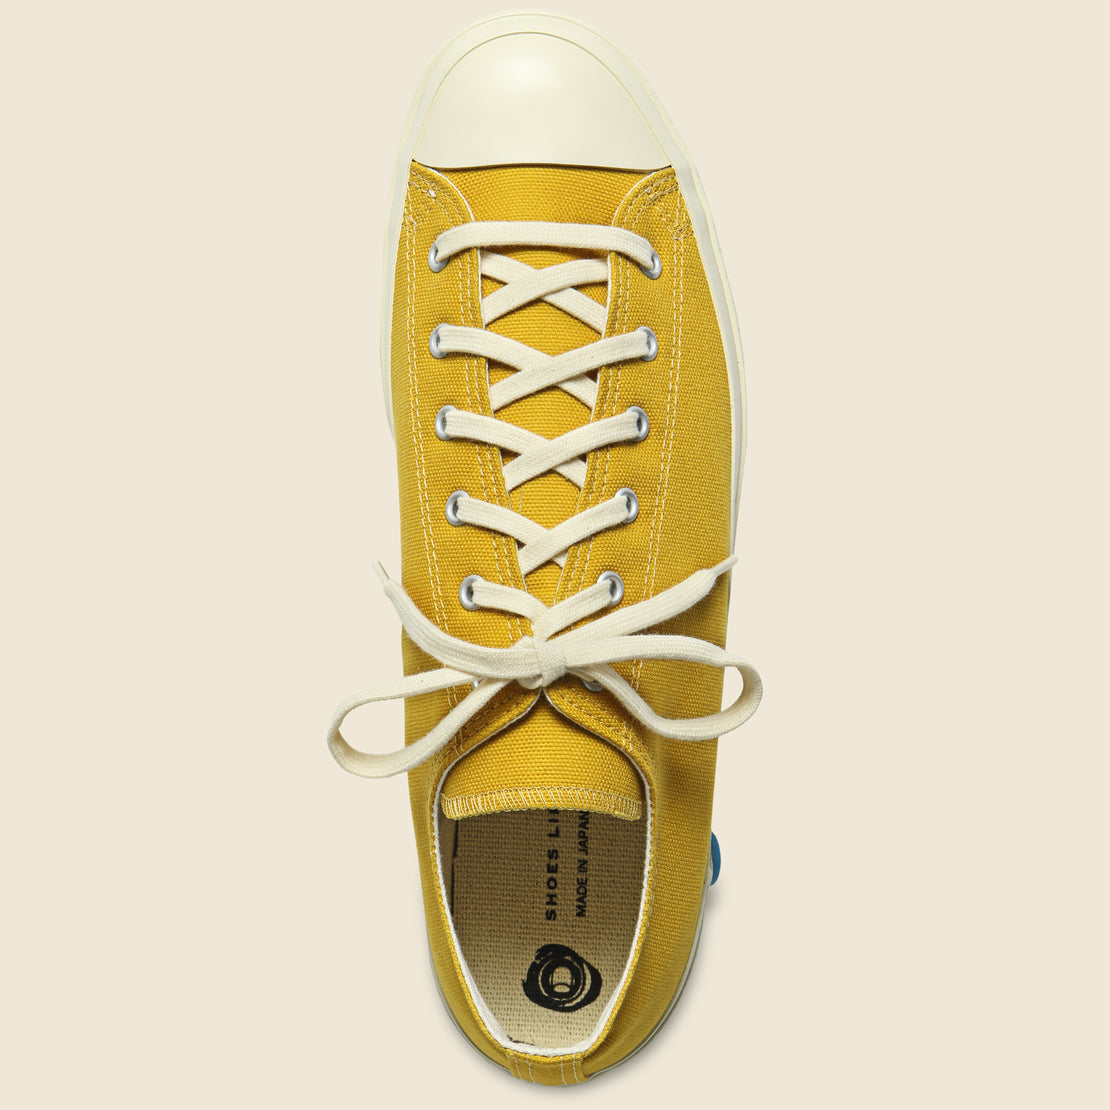 01-JP Lo Sneaker- Mustard - Shoes Like Pottery - STAG Provisions - Shoes - Athletic